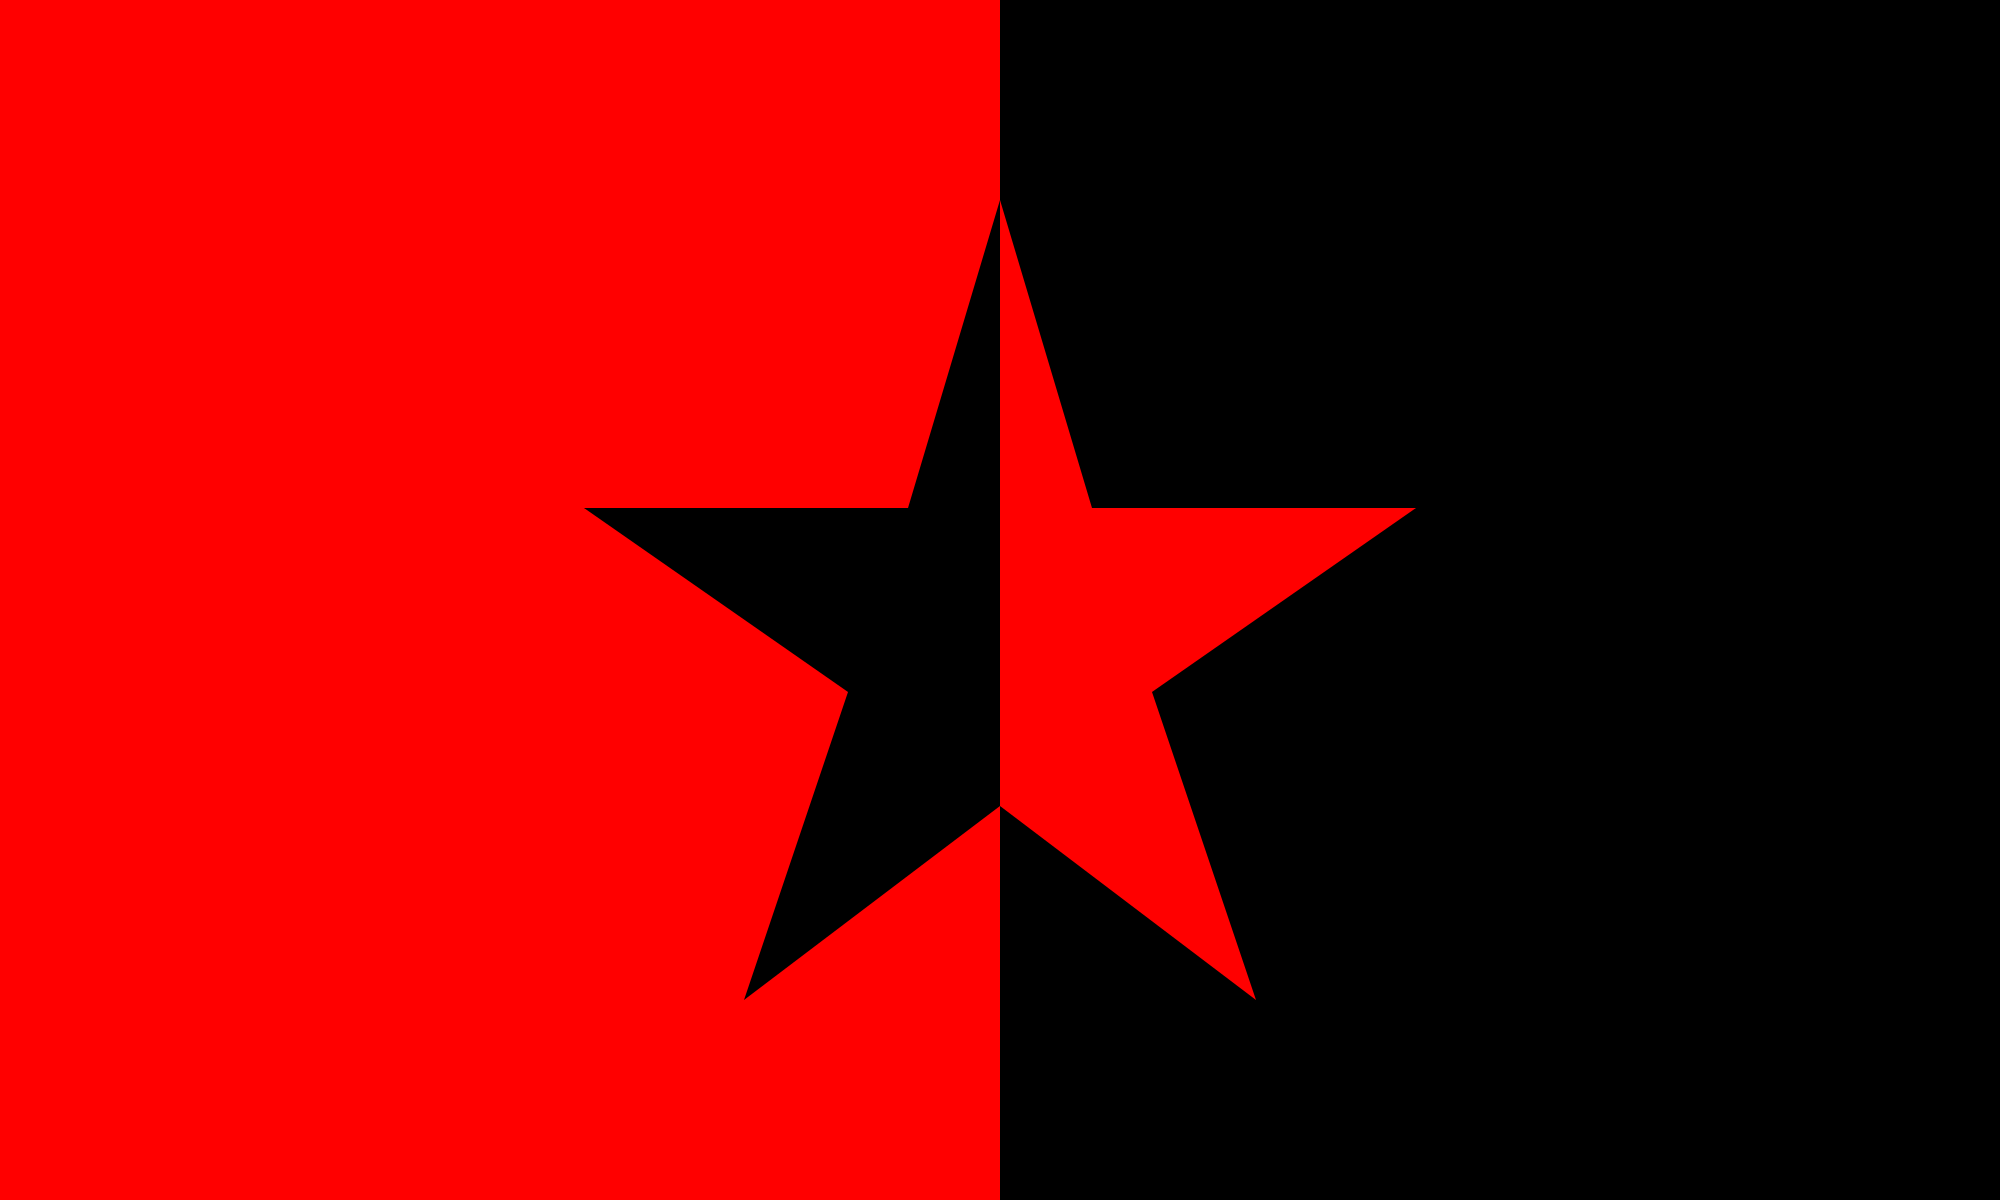 Red and Black Star Logo - File:Red black star flag.svg - Wikimedia Commons